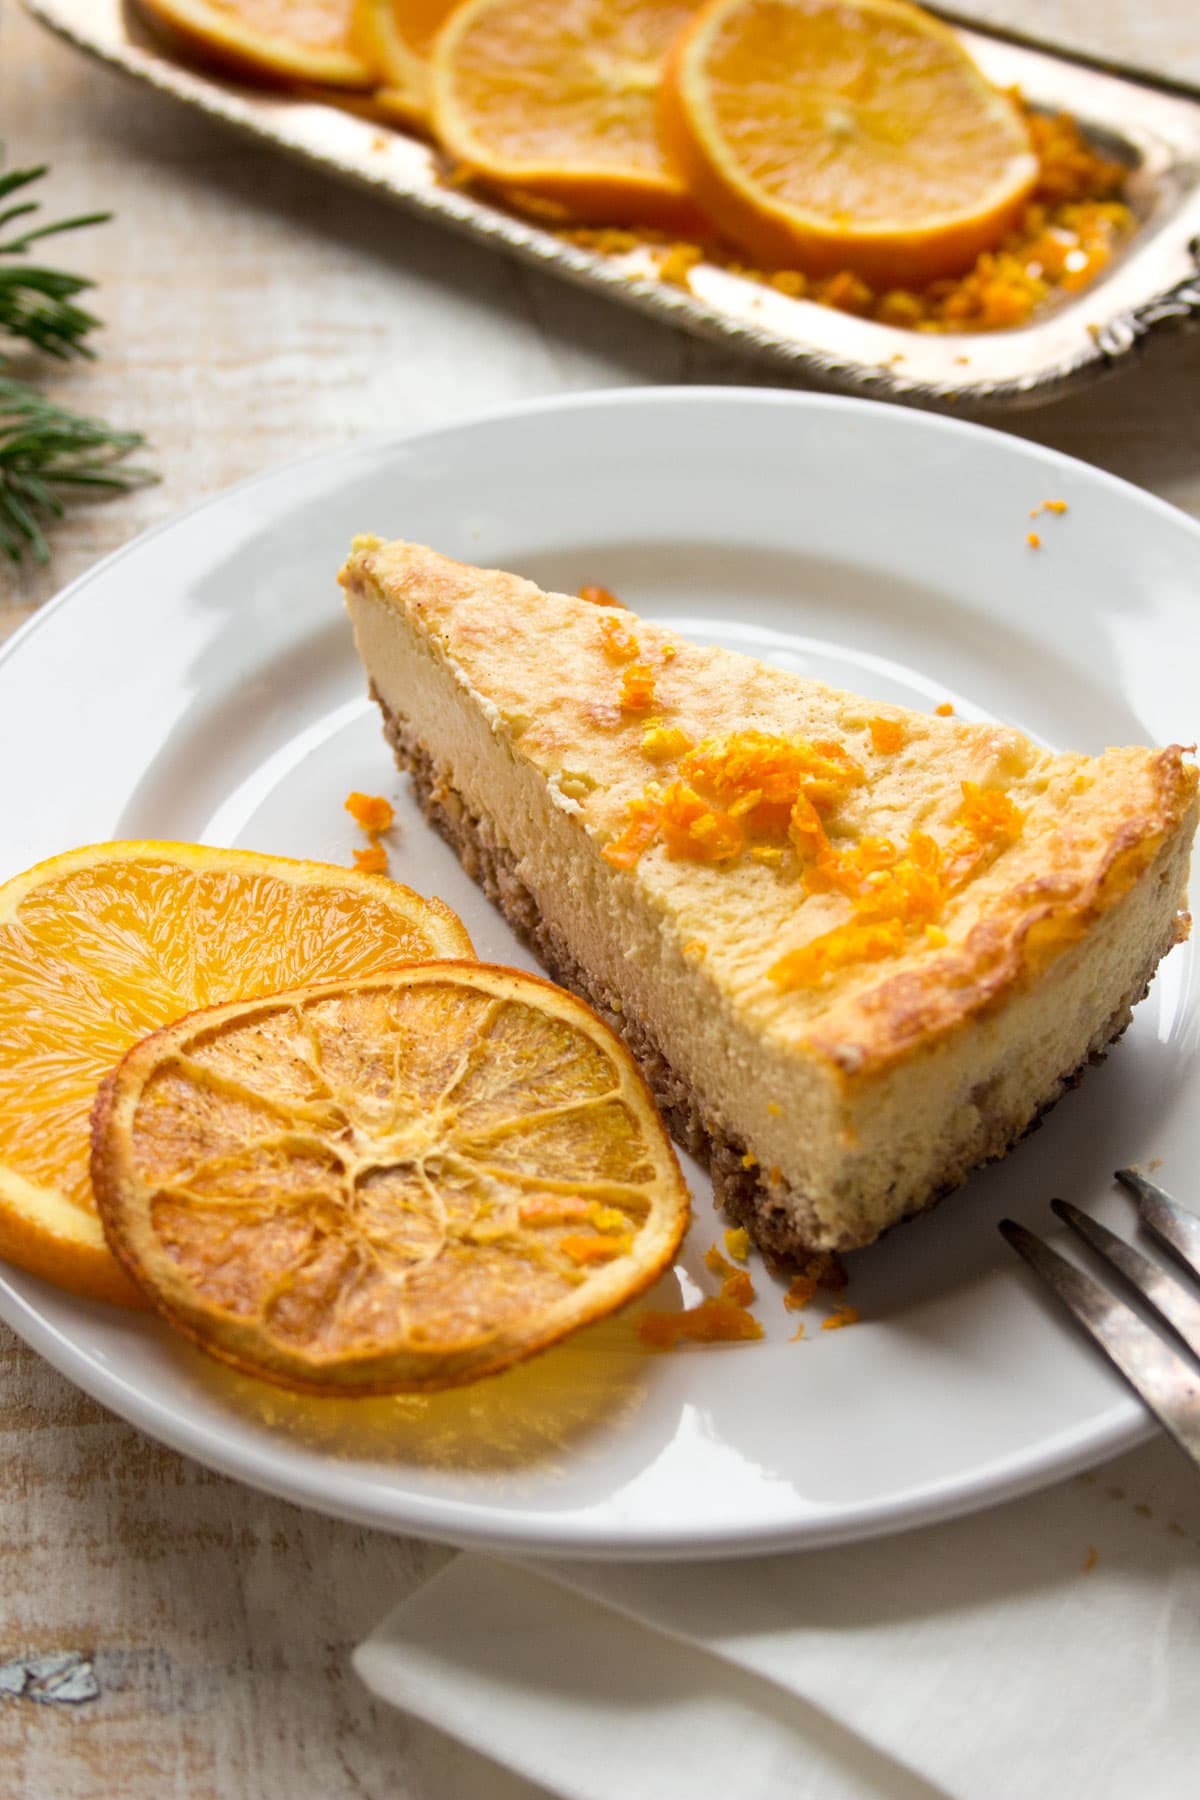 A slice of orange cheesecake on a plate.